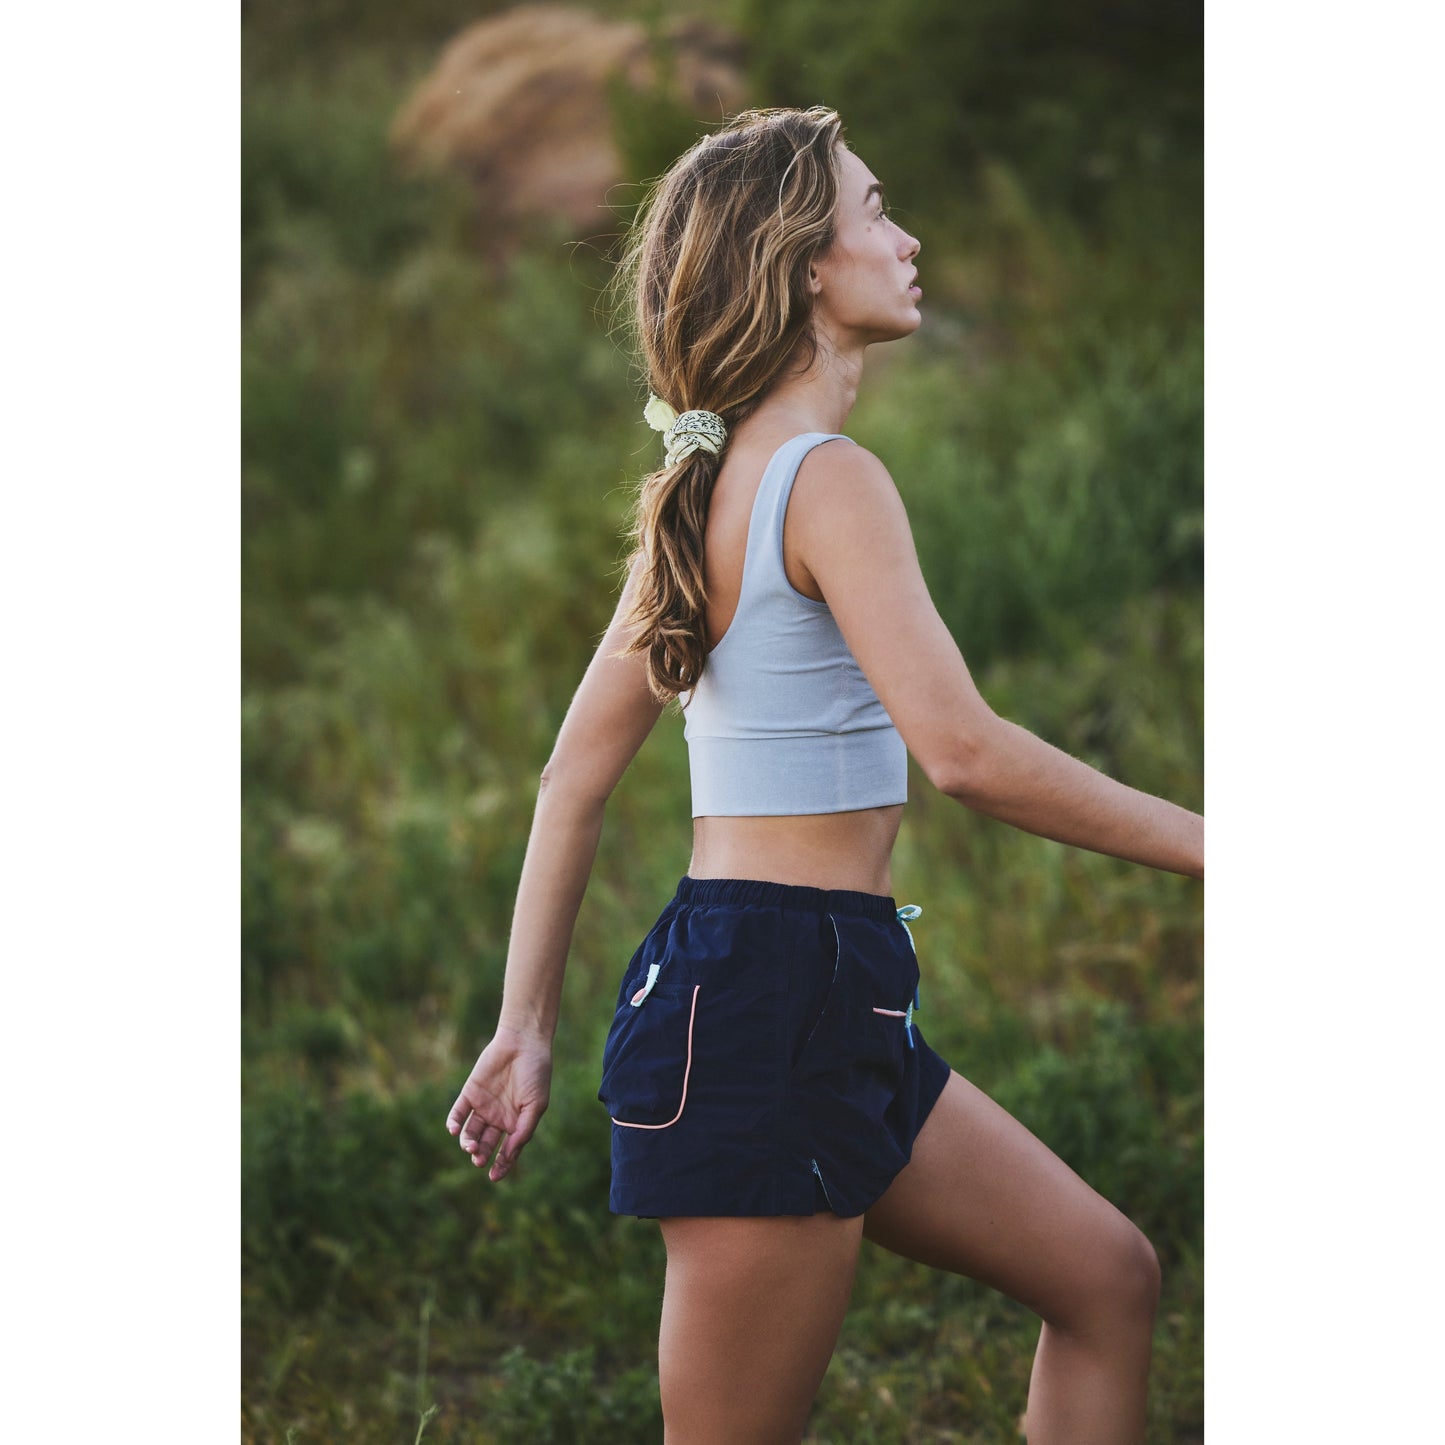 A young woman in Free People Movement athletic wear, including the Outskirts Skort in Midnight Navy Combo, walking outdoors, looking to the side with her hair in a ponytail.